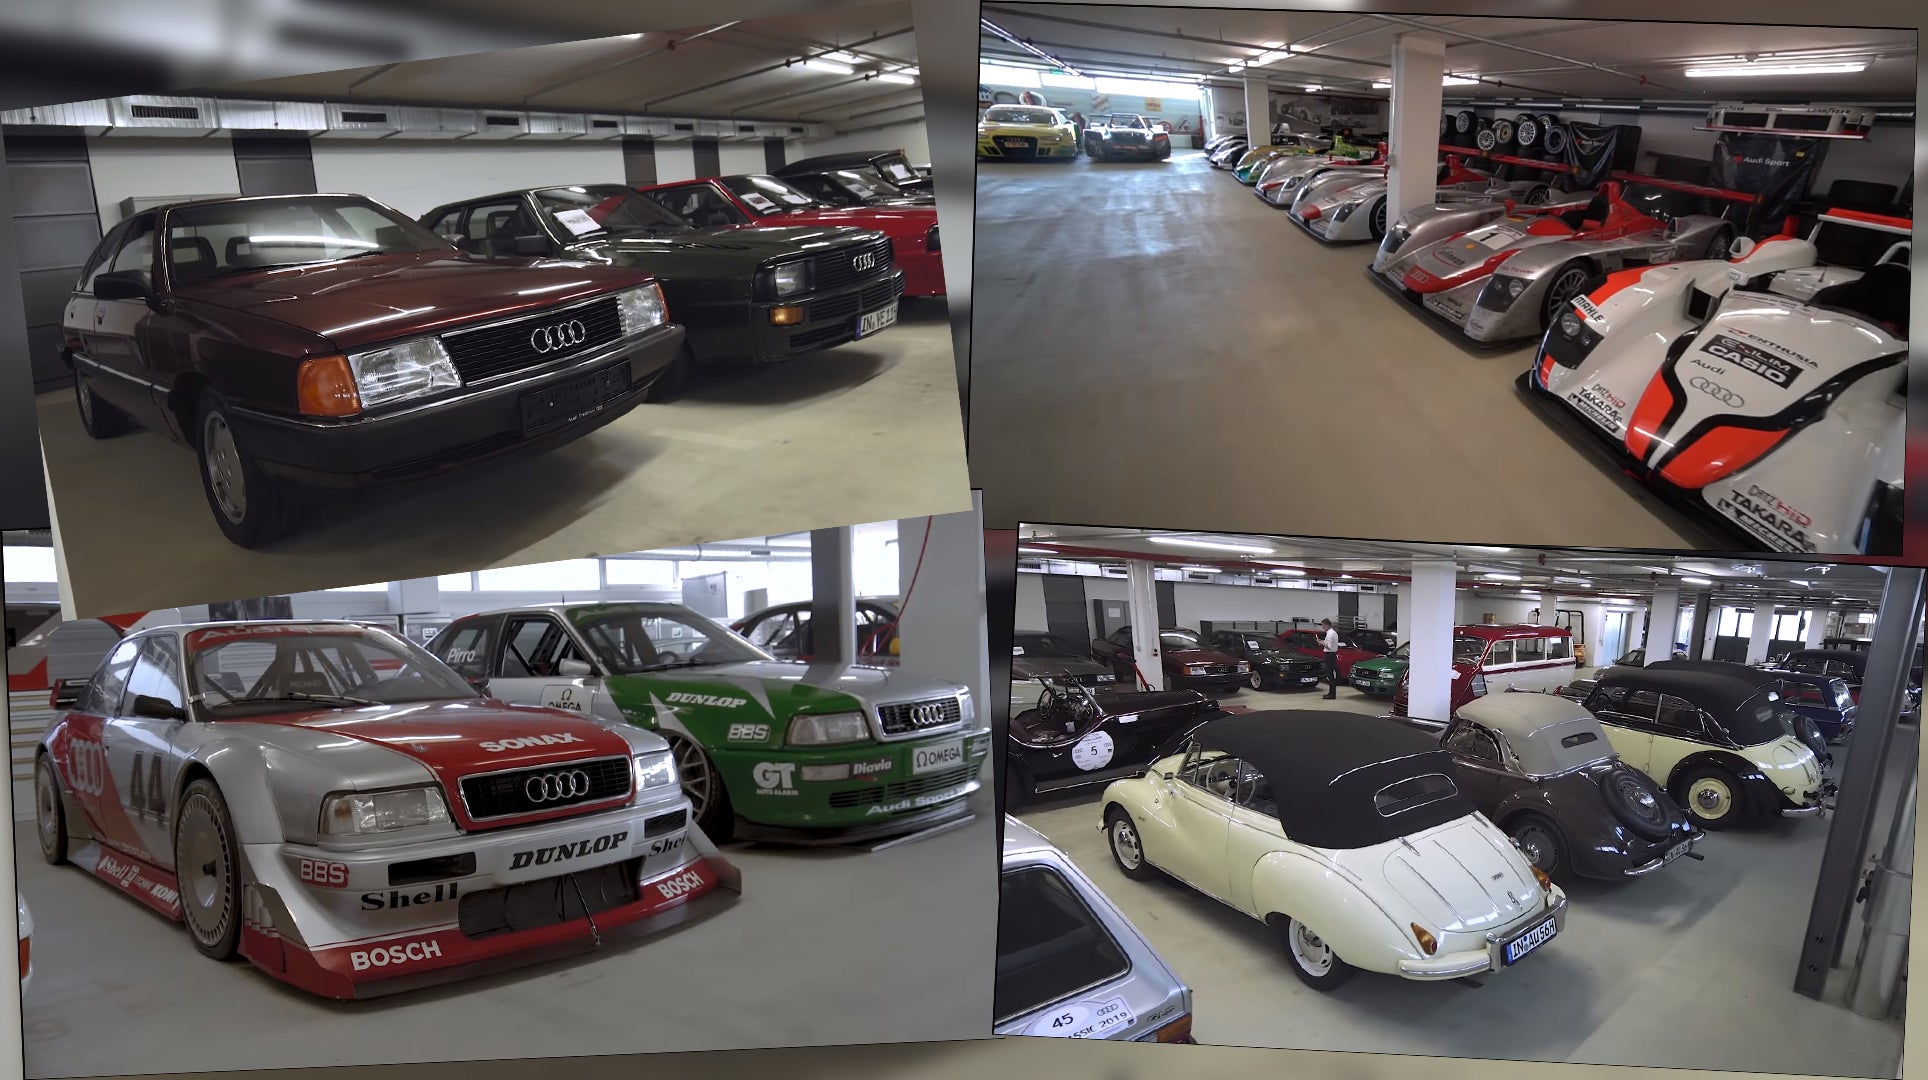 Take a Behind-the-Scenes Tour of Audi's Secret Car Collection